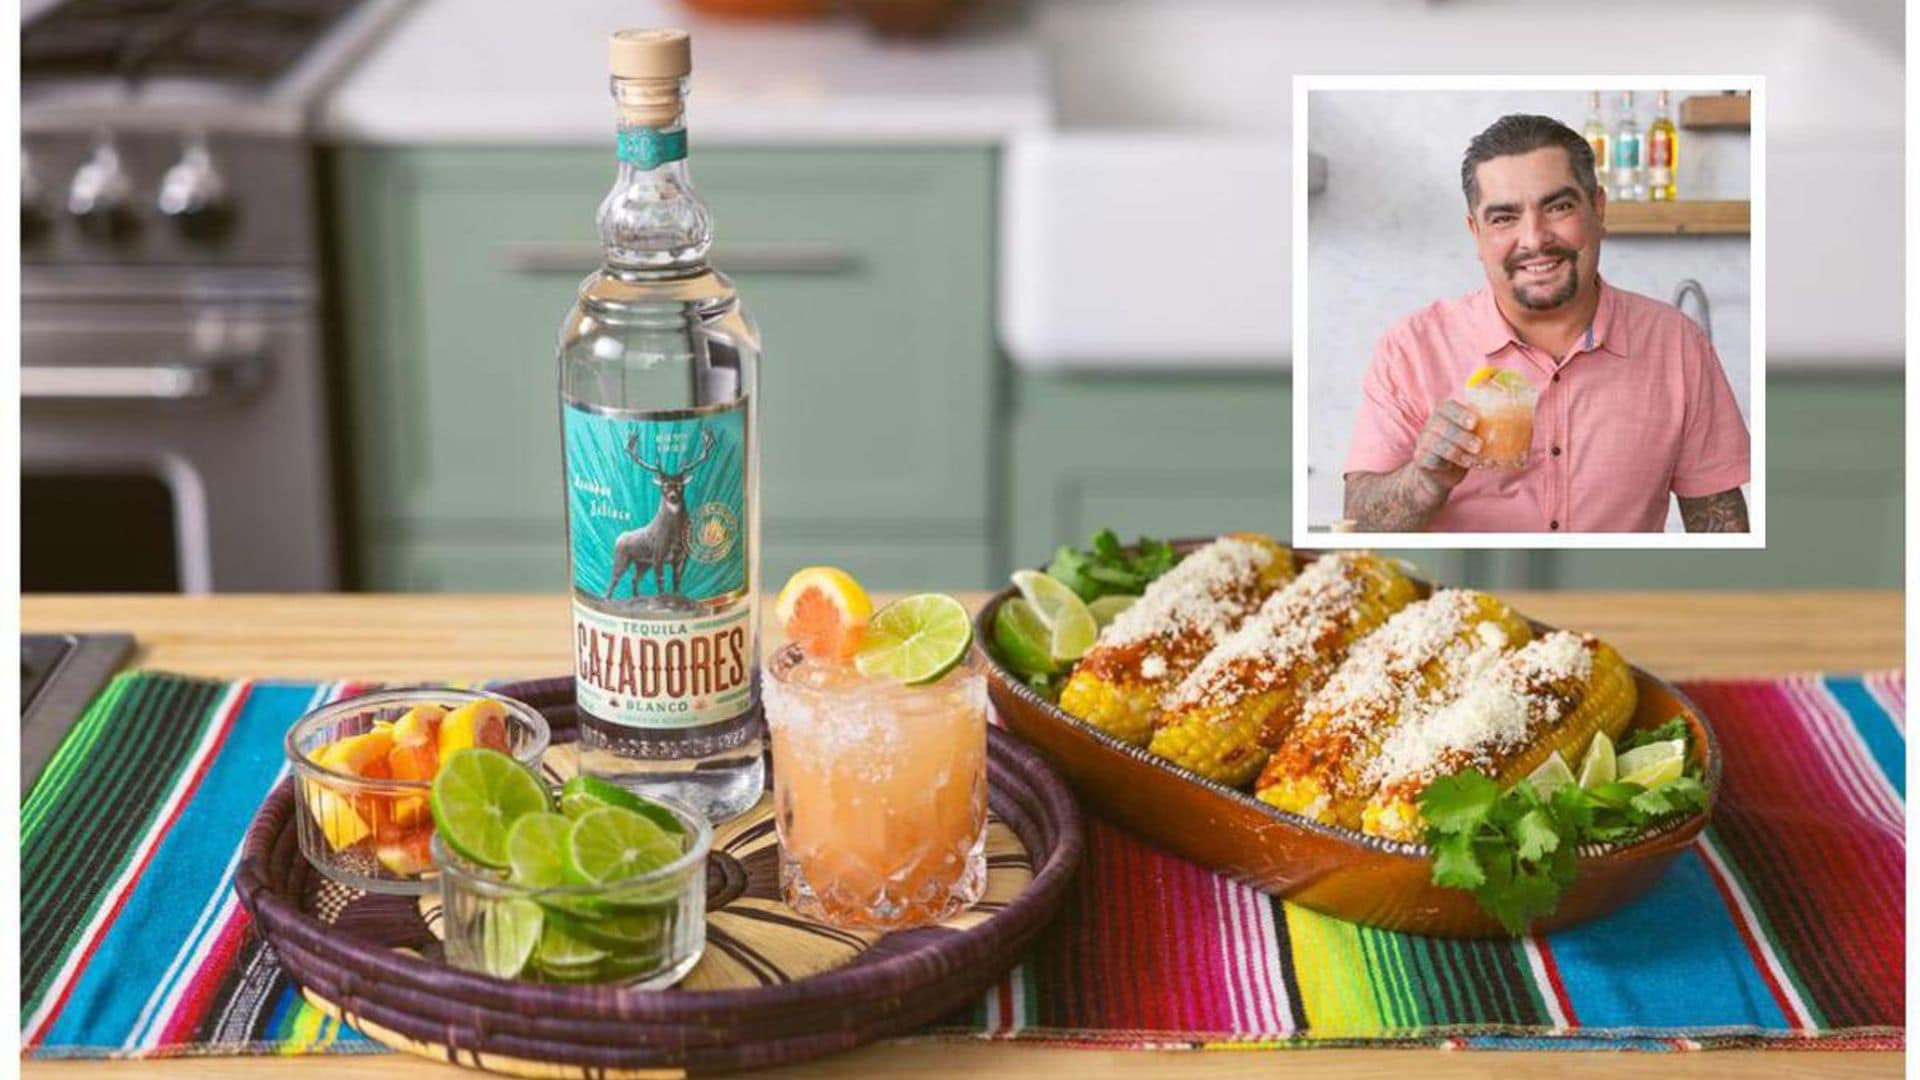 Elotes and margaritas are the perfect pairing, according to Chef Aarón Sánchez